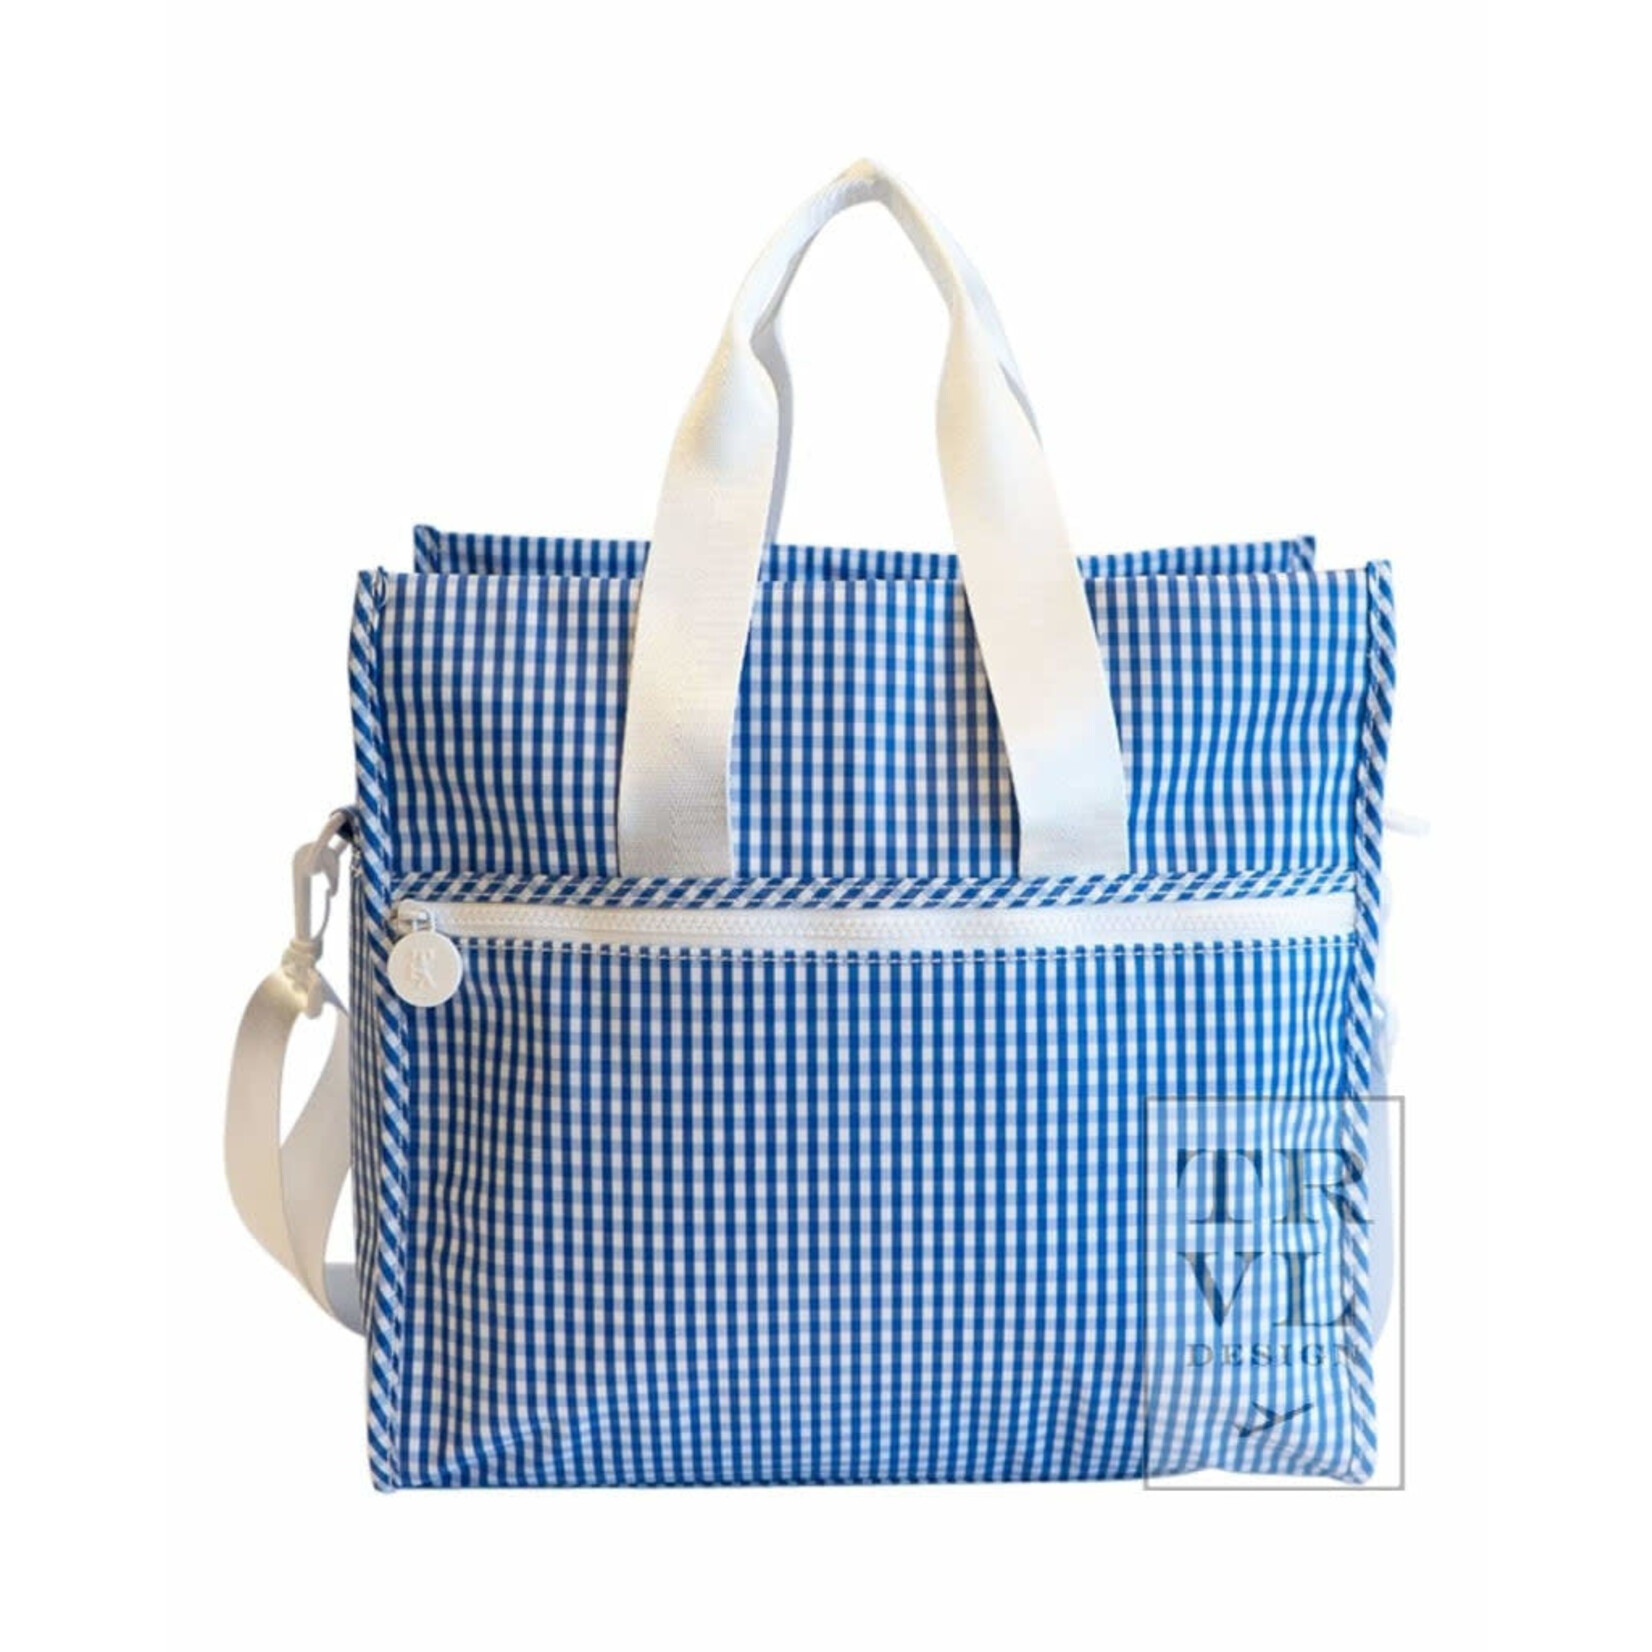 TRVL Design First Class Tote - Gingham Royal